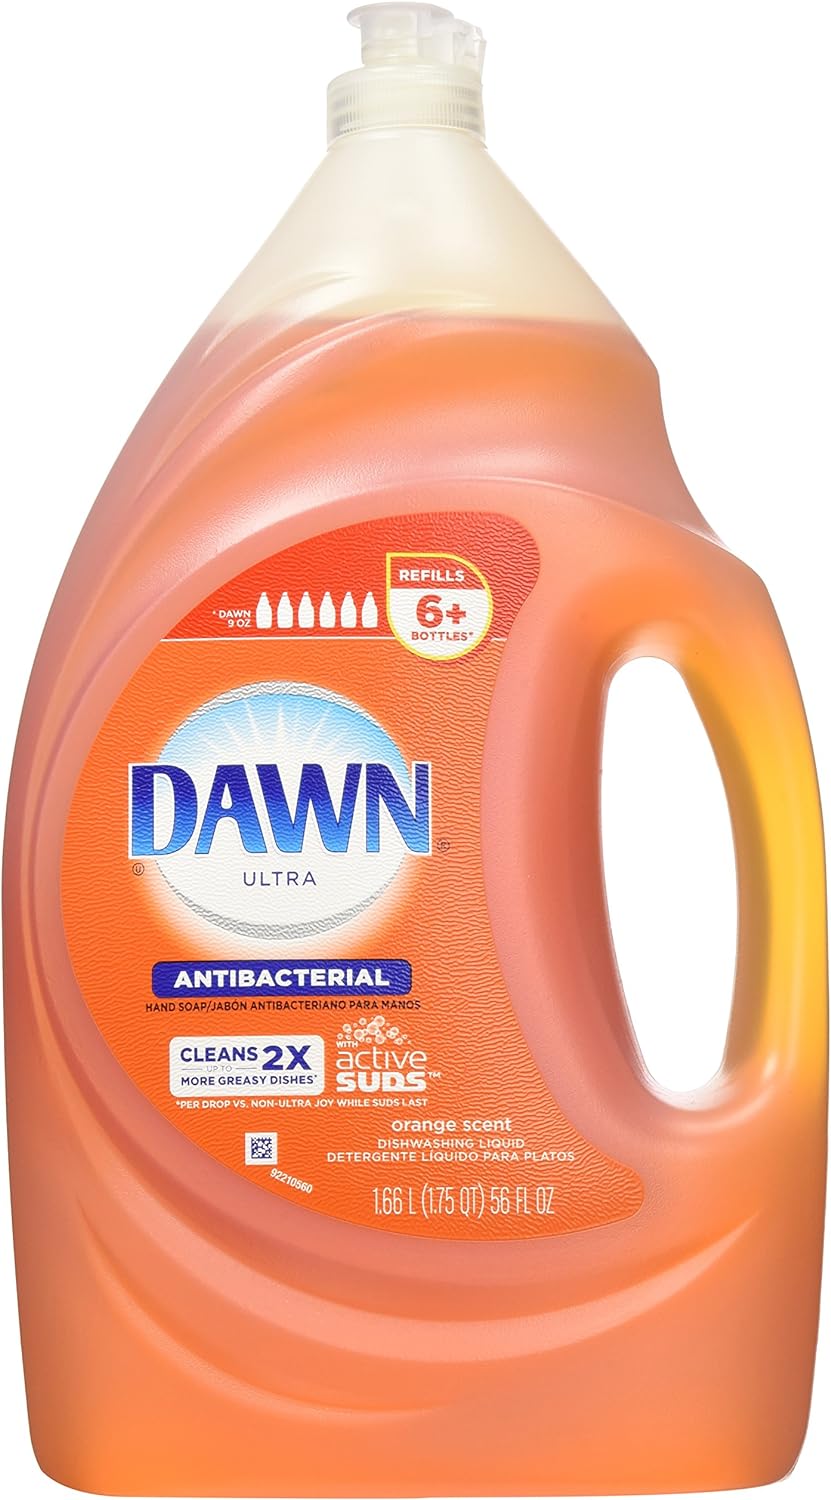 Dawn Ultra Concentrated Antibacterial Hand Soap Dishwashing Liquid Refill, Orange Scent, 56 Ounce